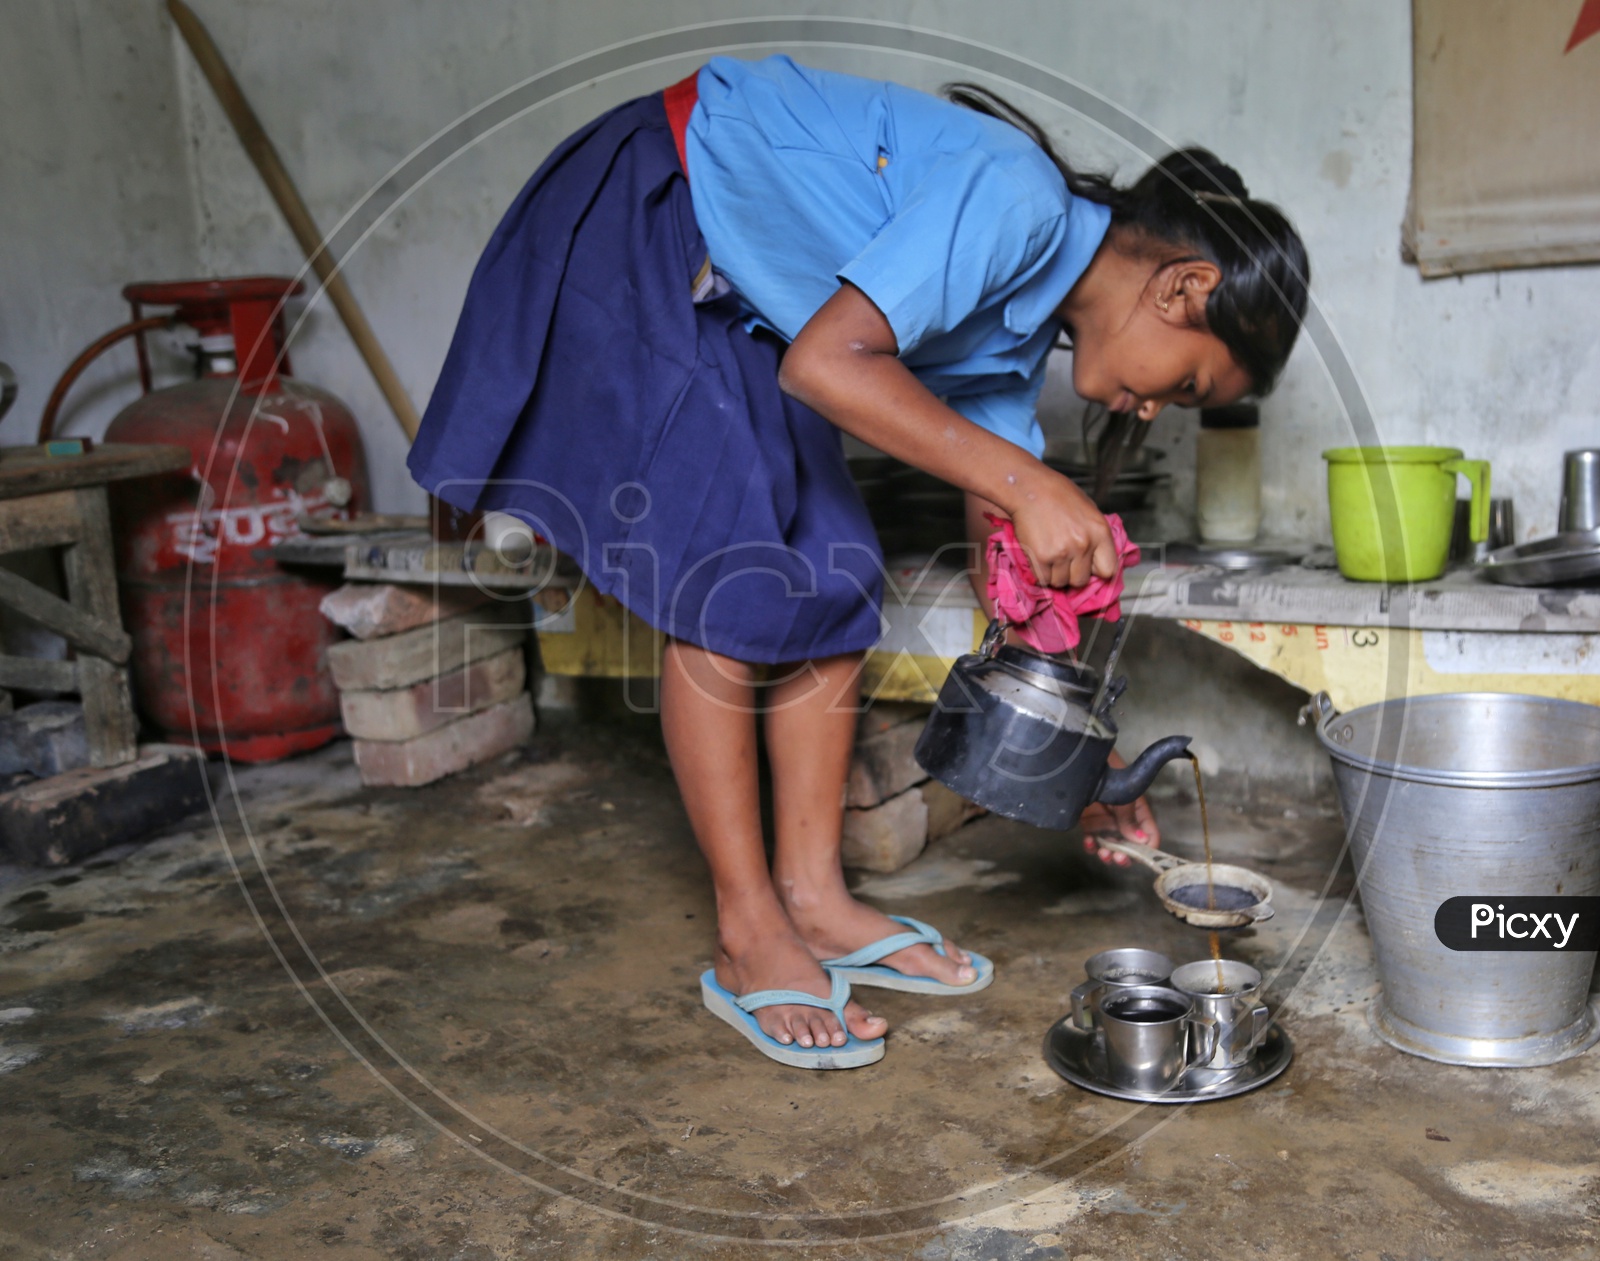 A School Girl Wearing Uniform And Making Tea in a Rural Village House